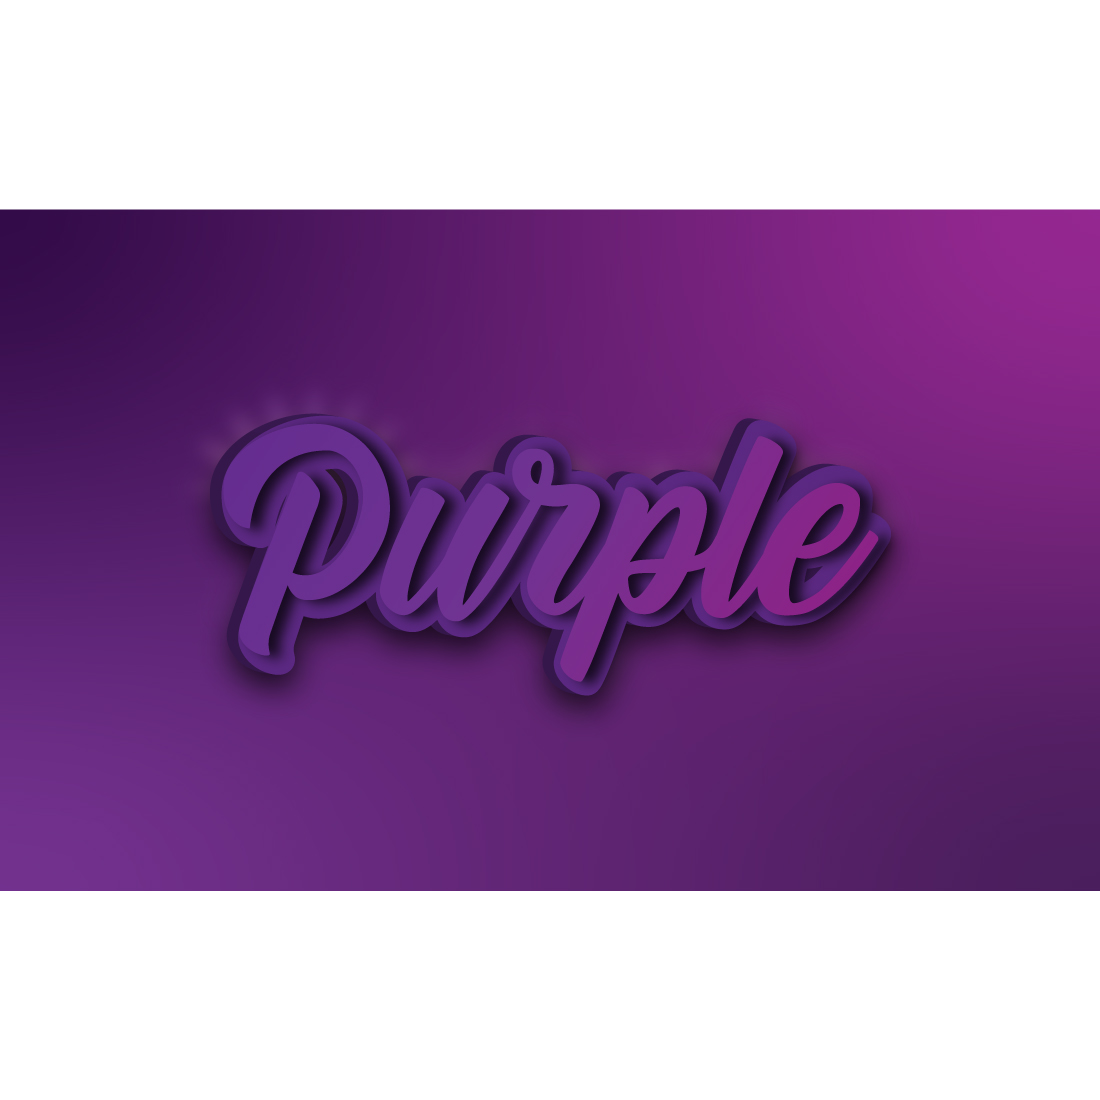 Purple text that says purple on the bottom editable text effect, text, 3d purple eps text effect, style 3d purple text effect,t purple 3d editable text effect, 3d purple psd text, purple 3d text style effect, cover image.